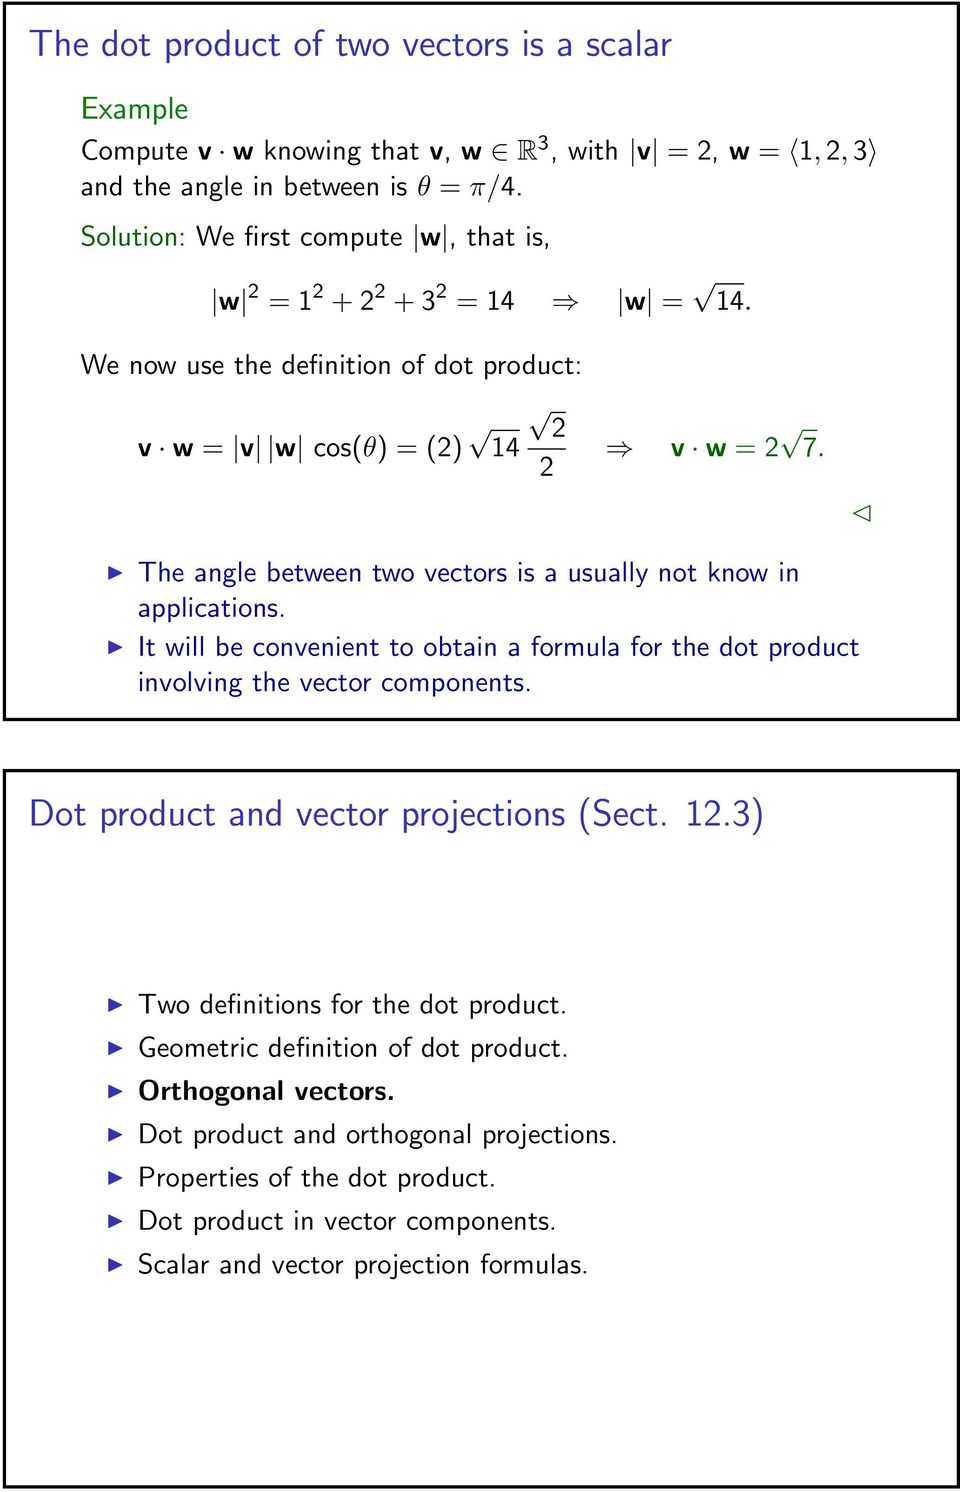 The angle between two vectors is a usually not know in applications. It will be convenient to obtain a formula for the dot product involving the vector components.